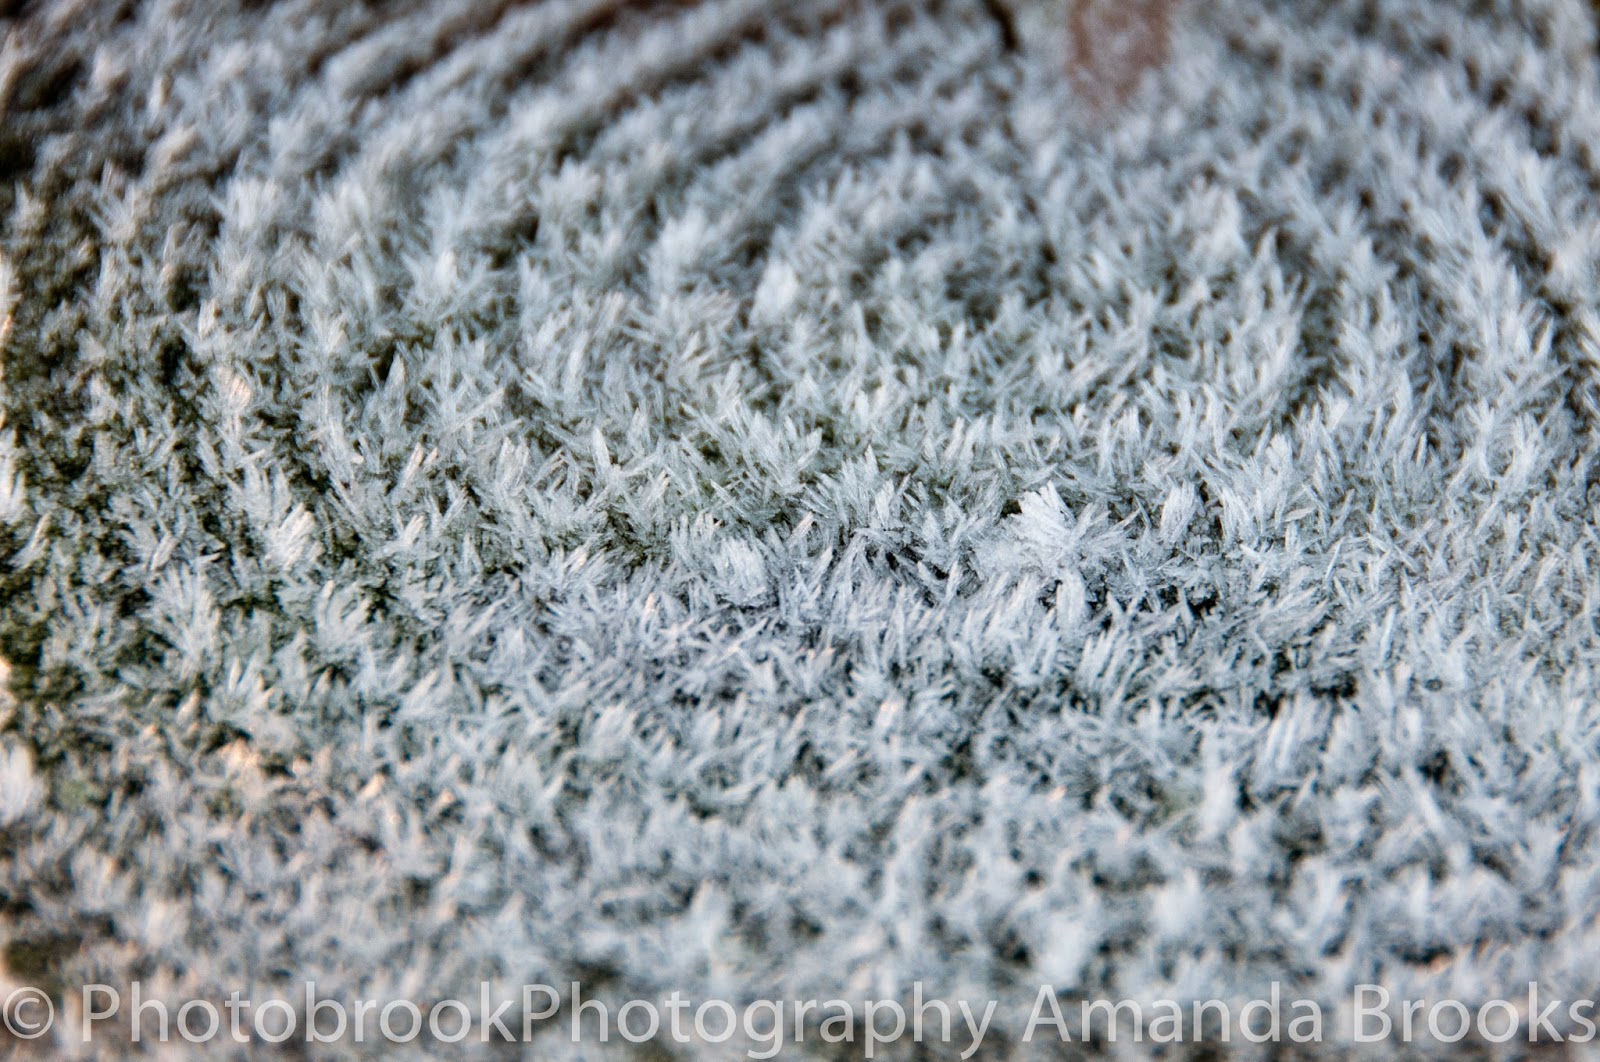 Frost patterns on wood